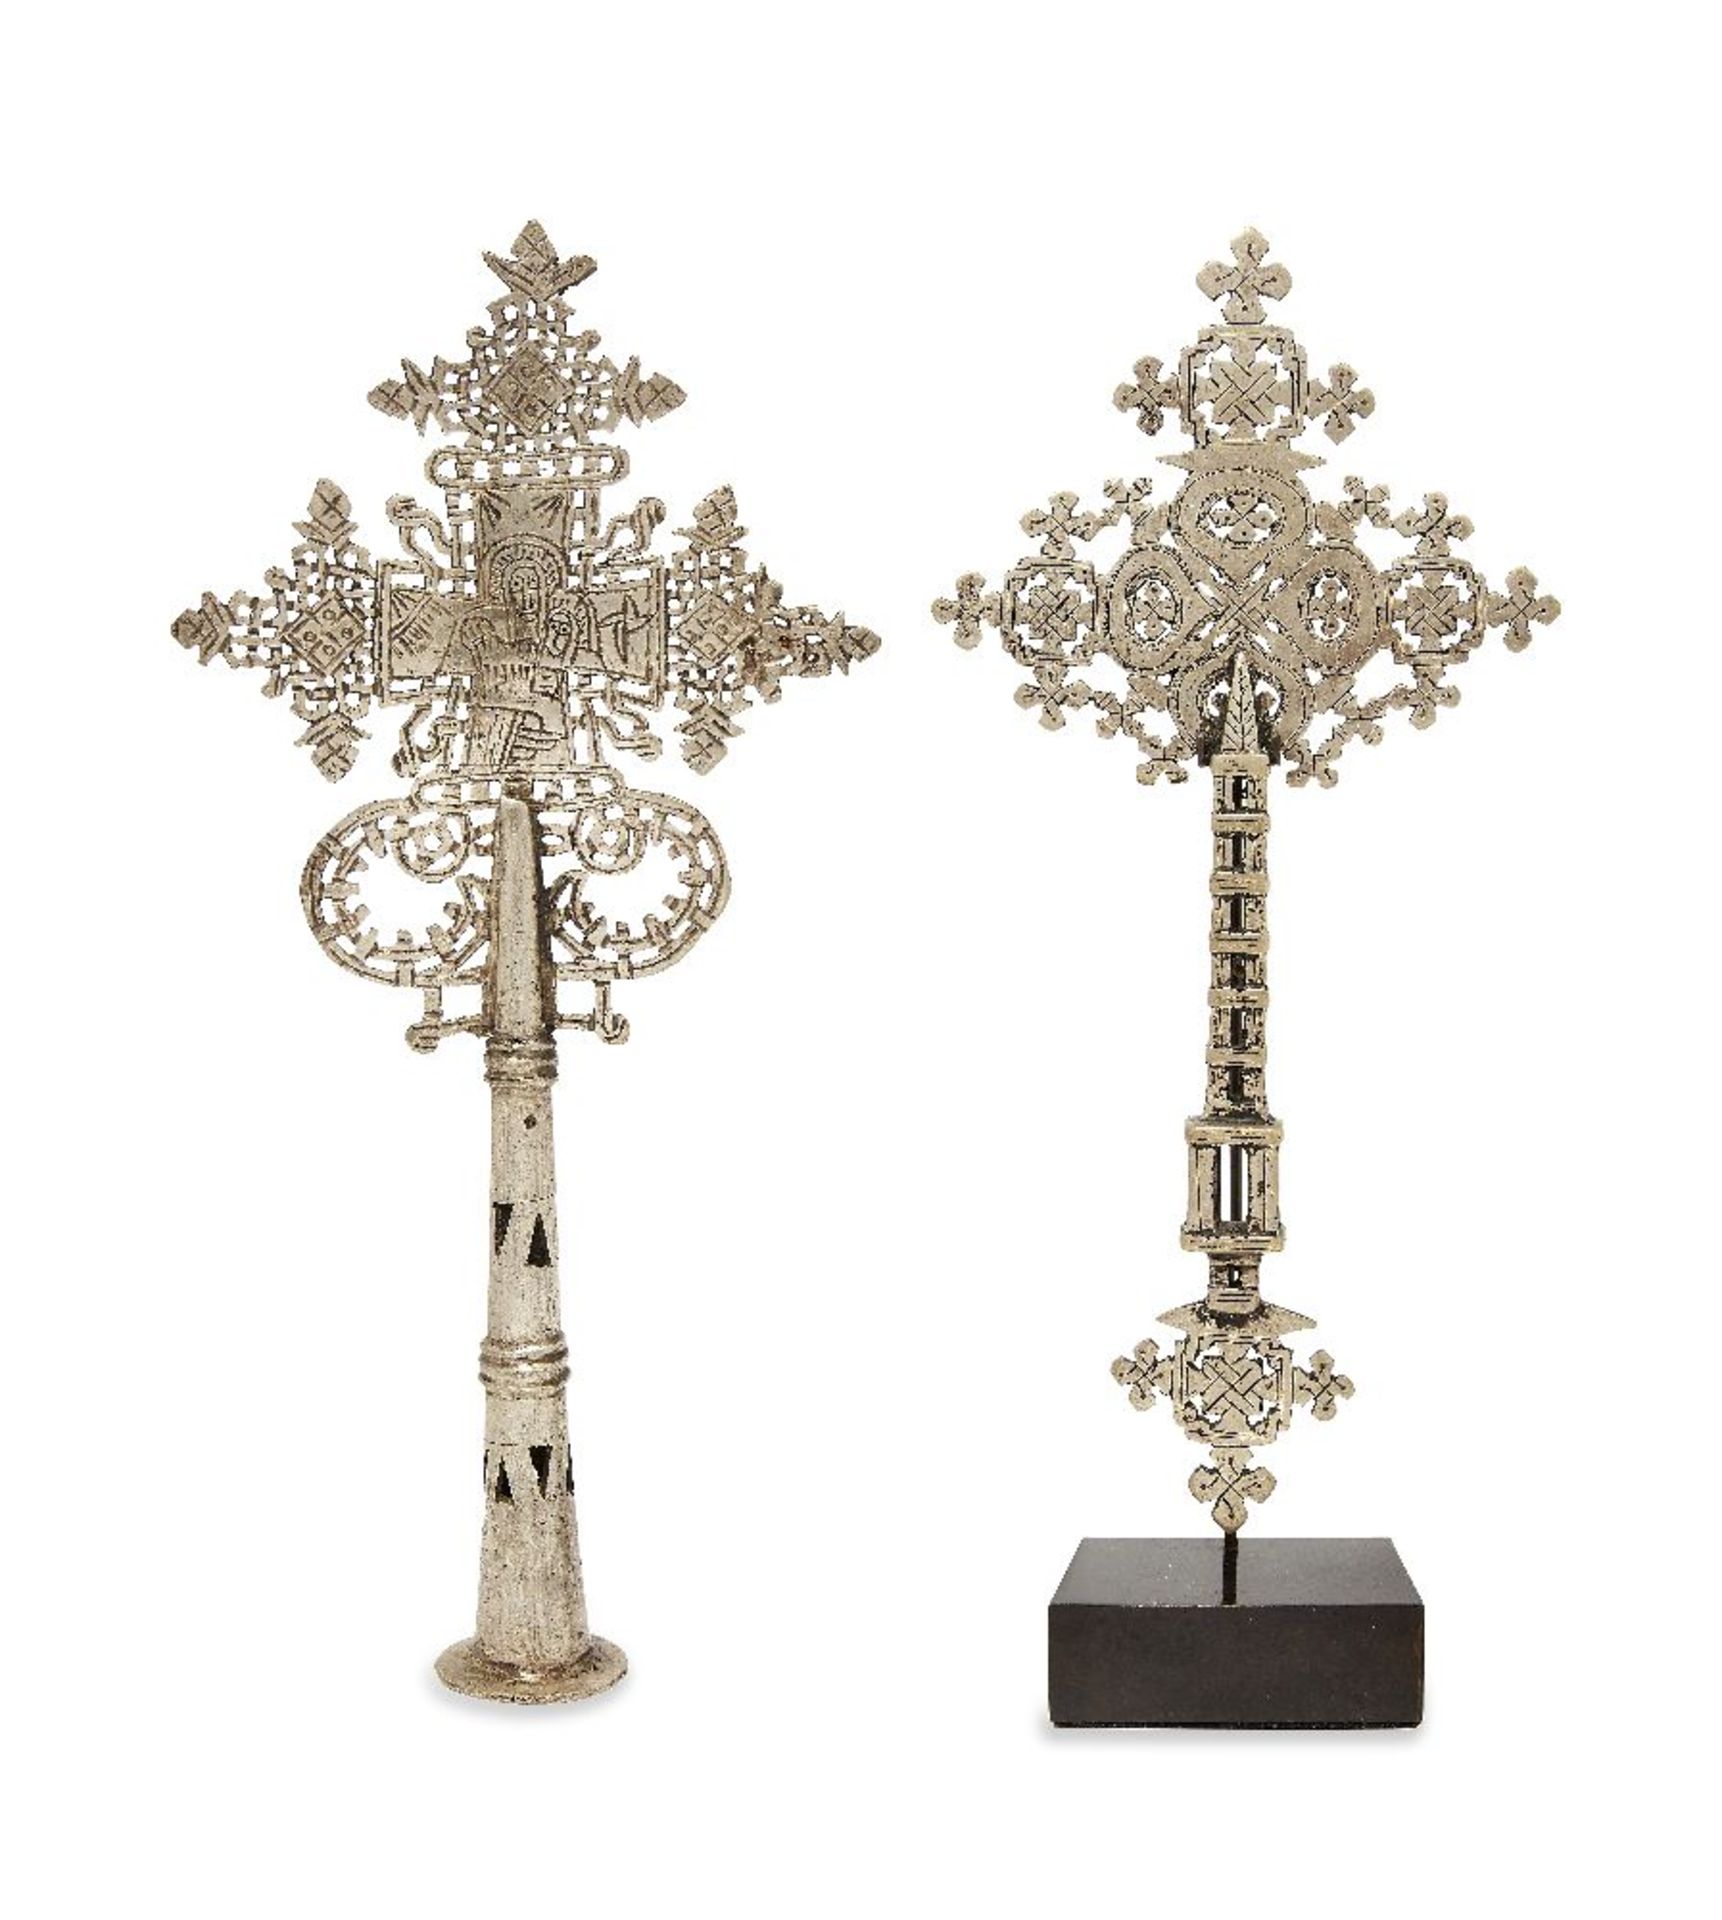 Two white metal Ethiopian Coptic crosses, mid 20th century, each with intricate design, one a